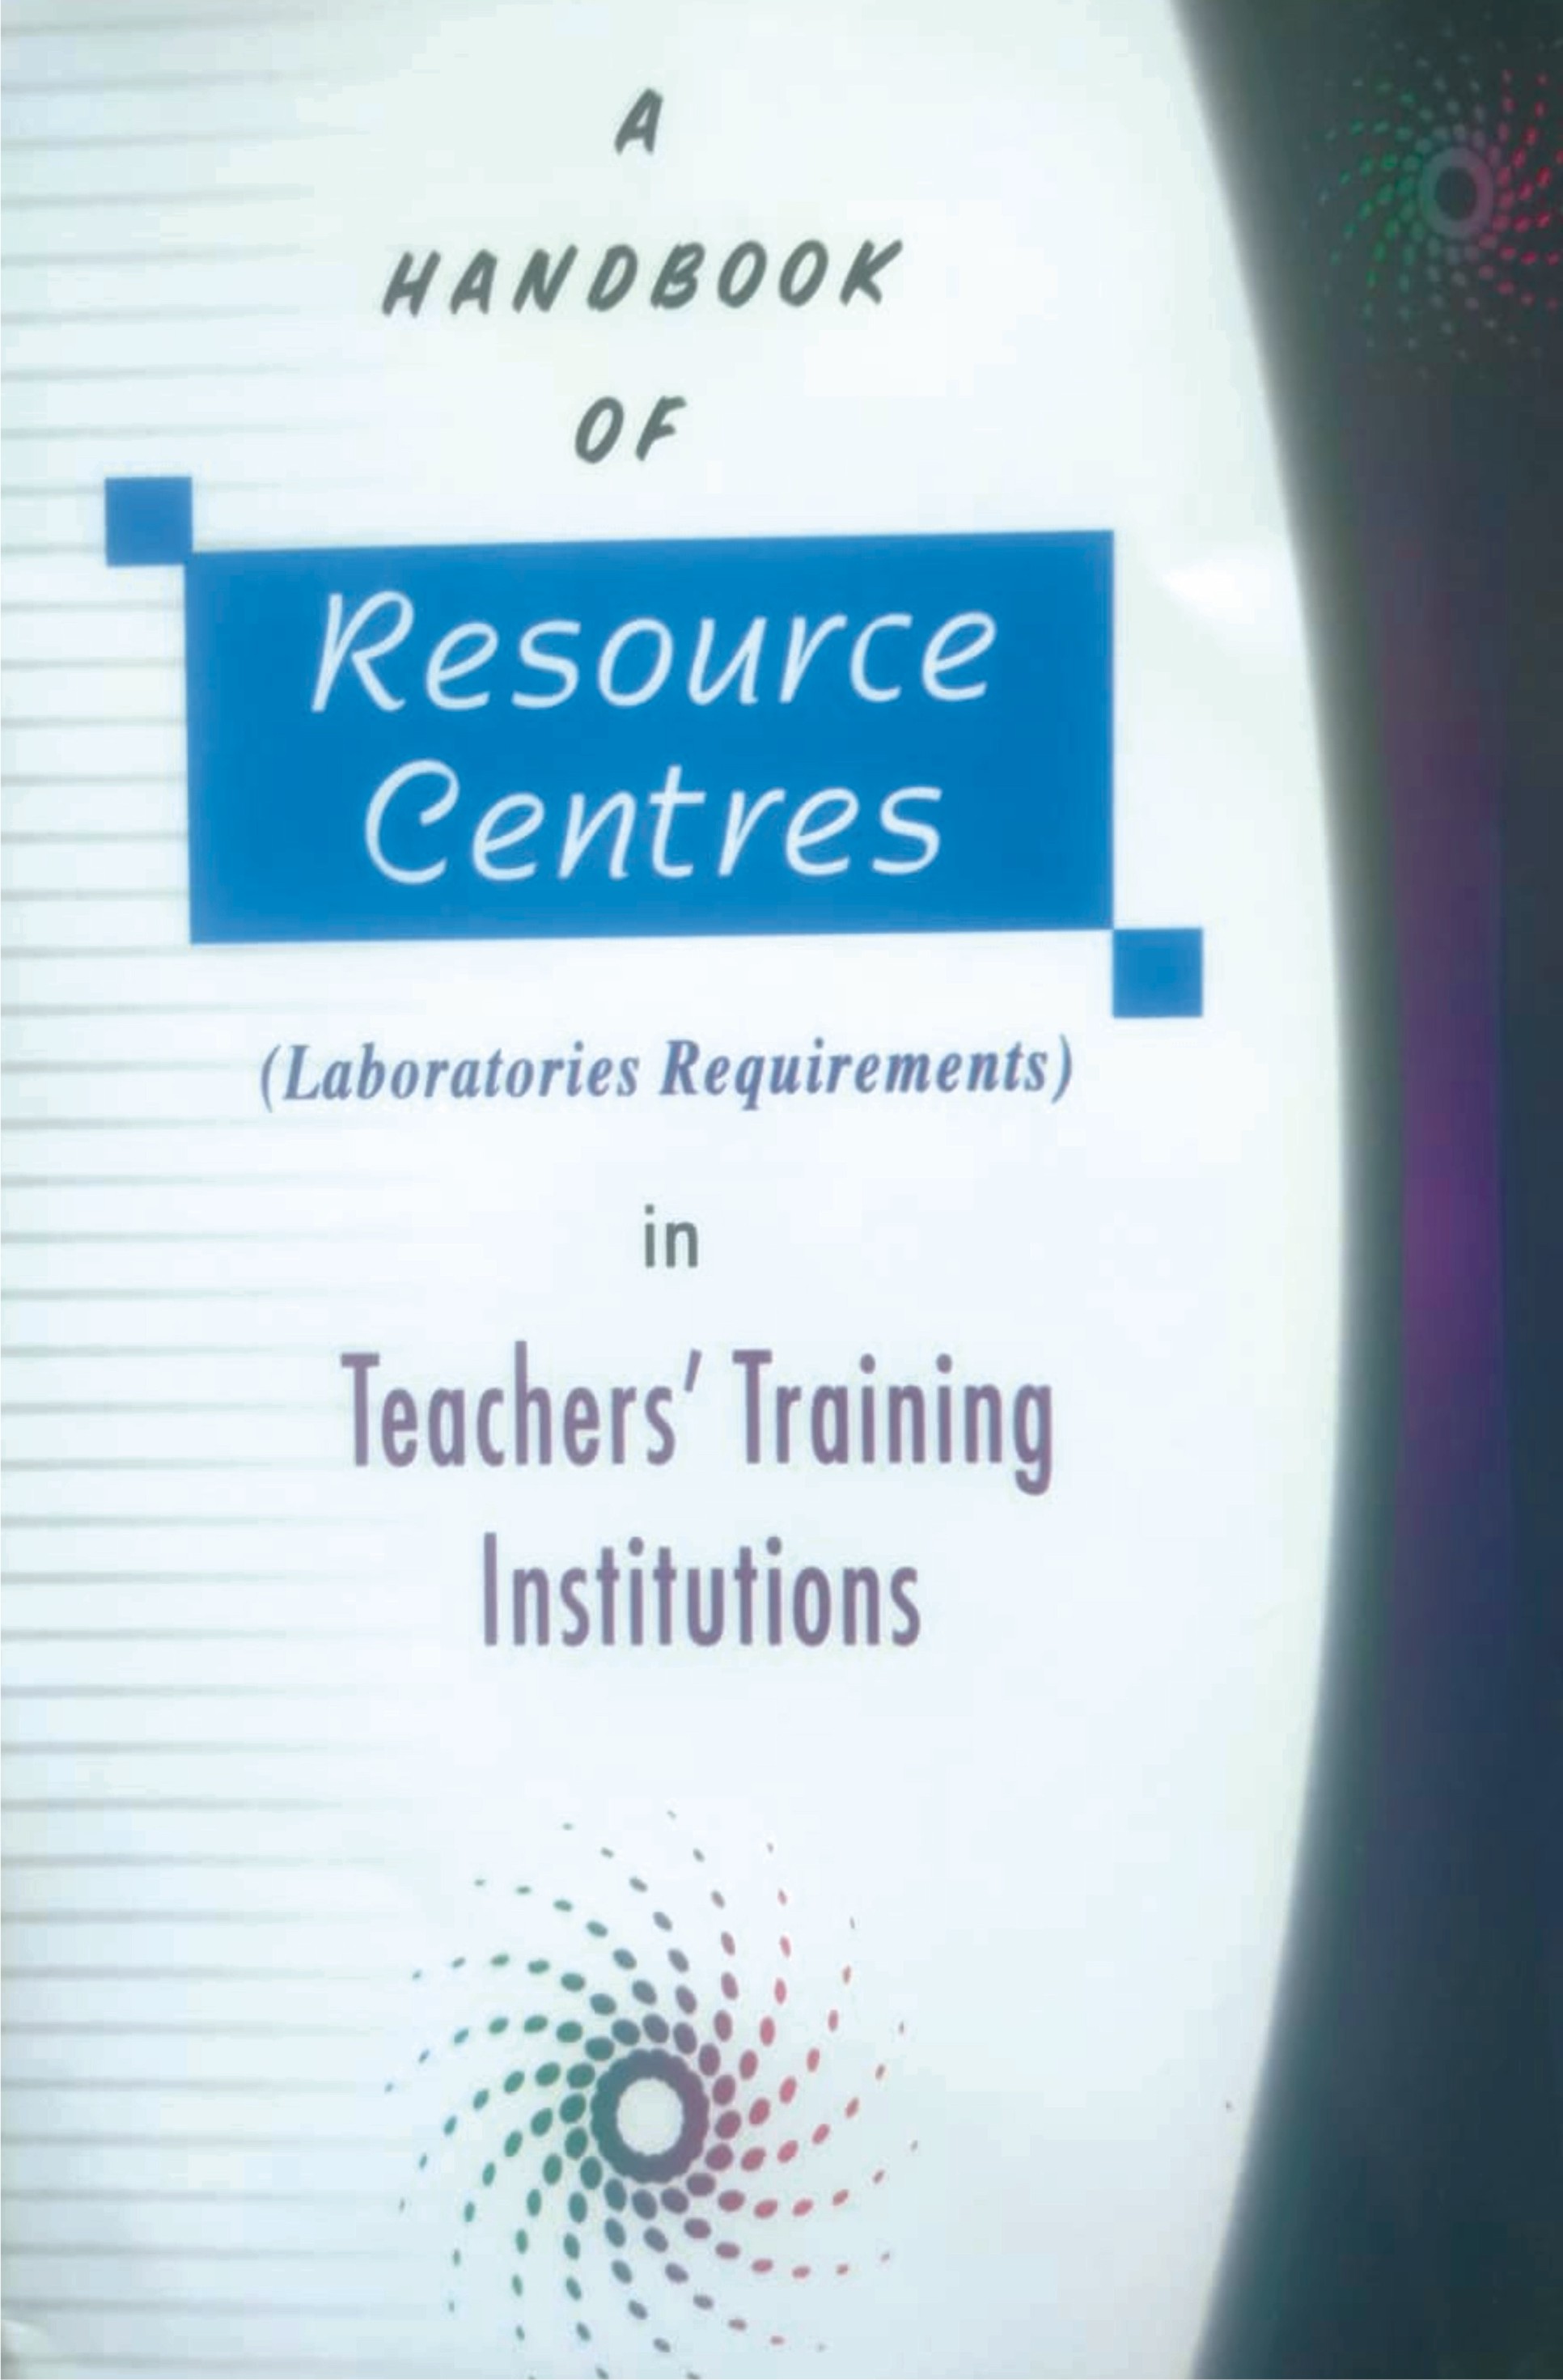 A-HANDBOOK-OF-RESOURCE-CENTRES-(Laboratories-Requirements)-IN-TEACHERS-TRAINING-INSTITUTIONS